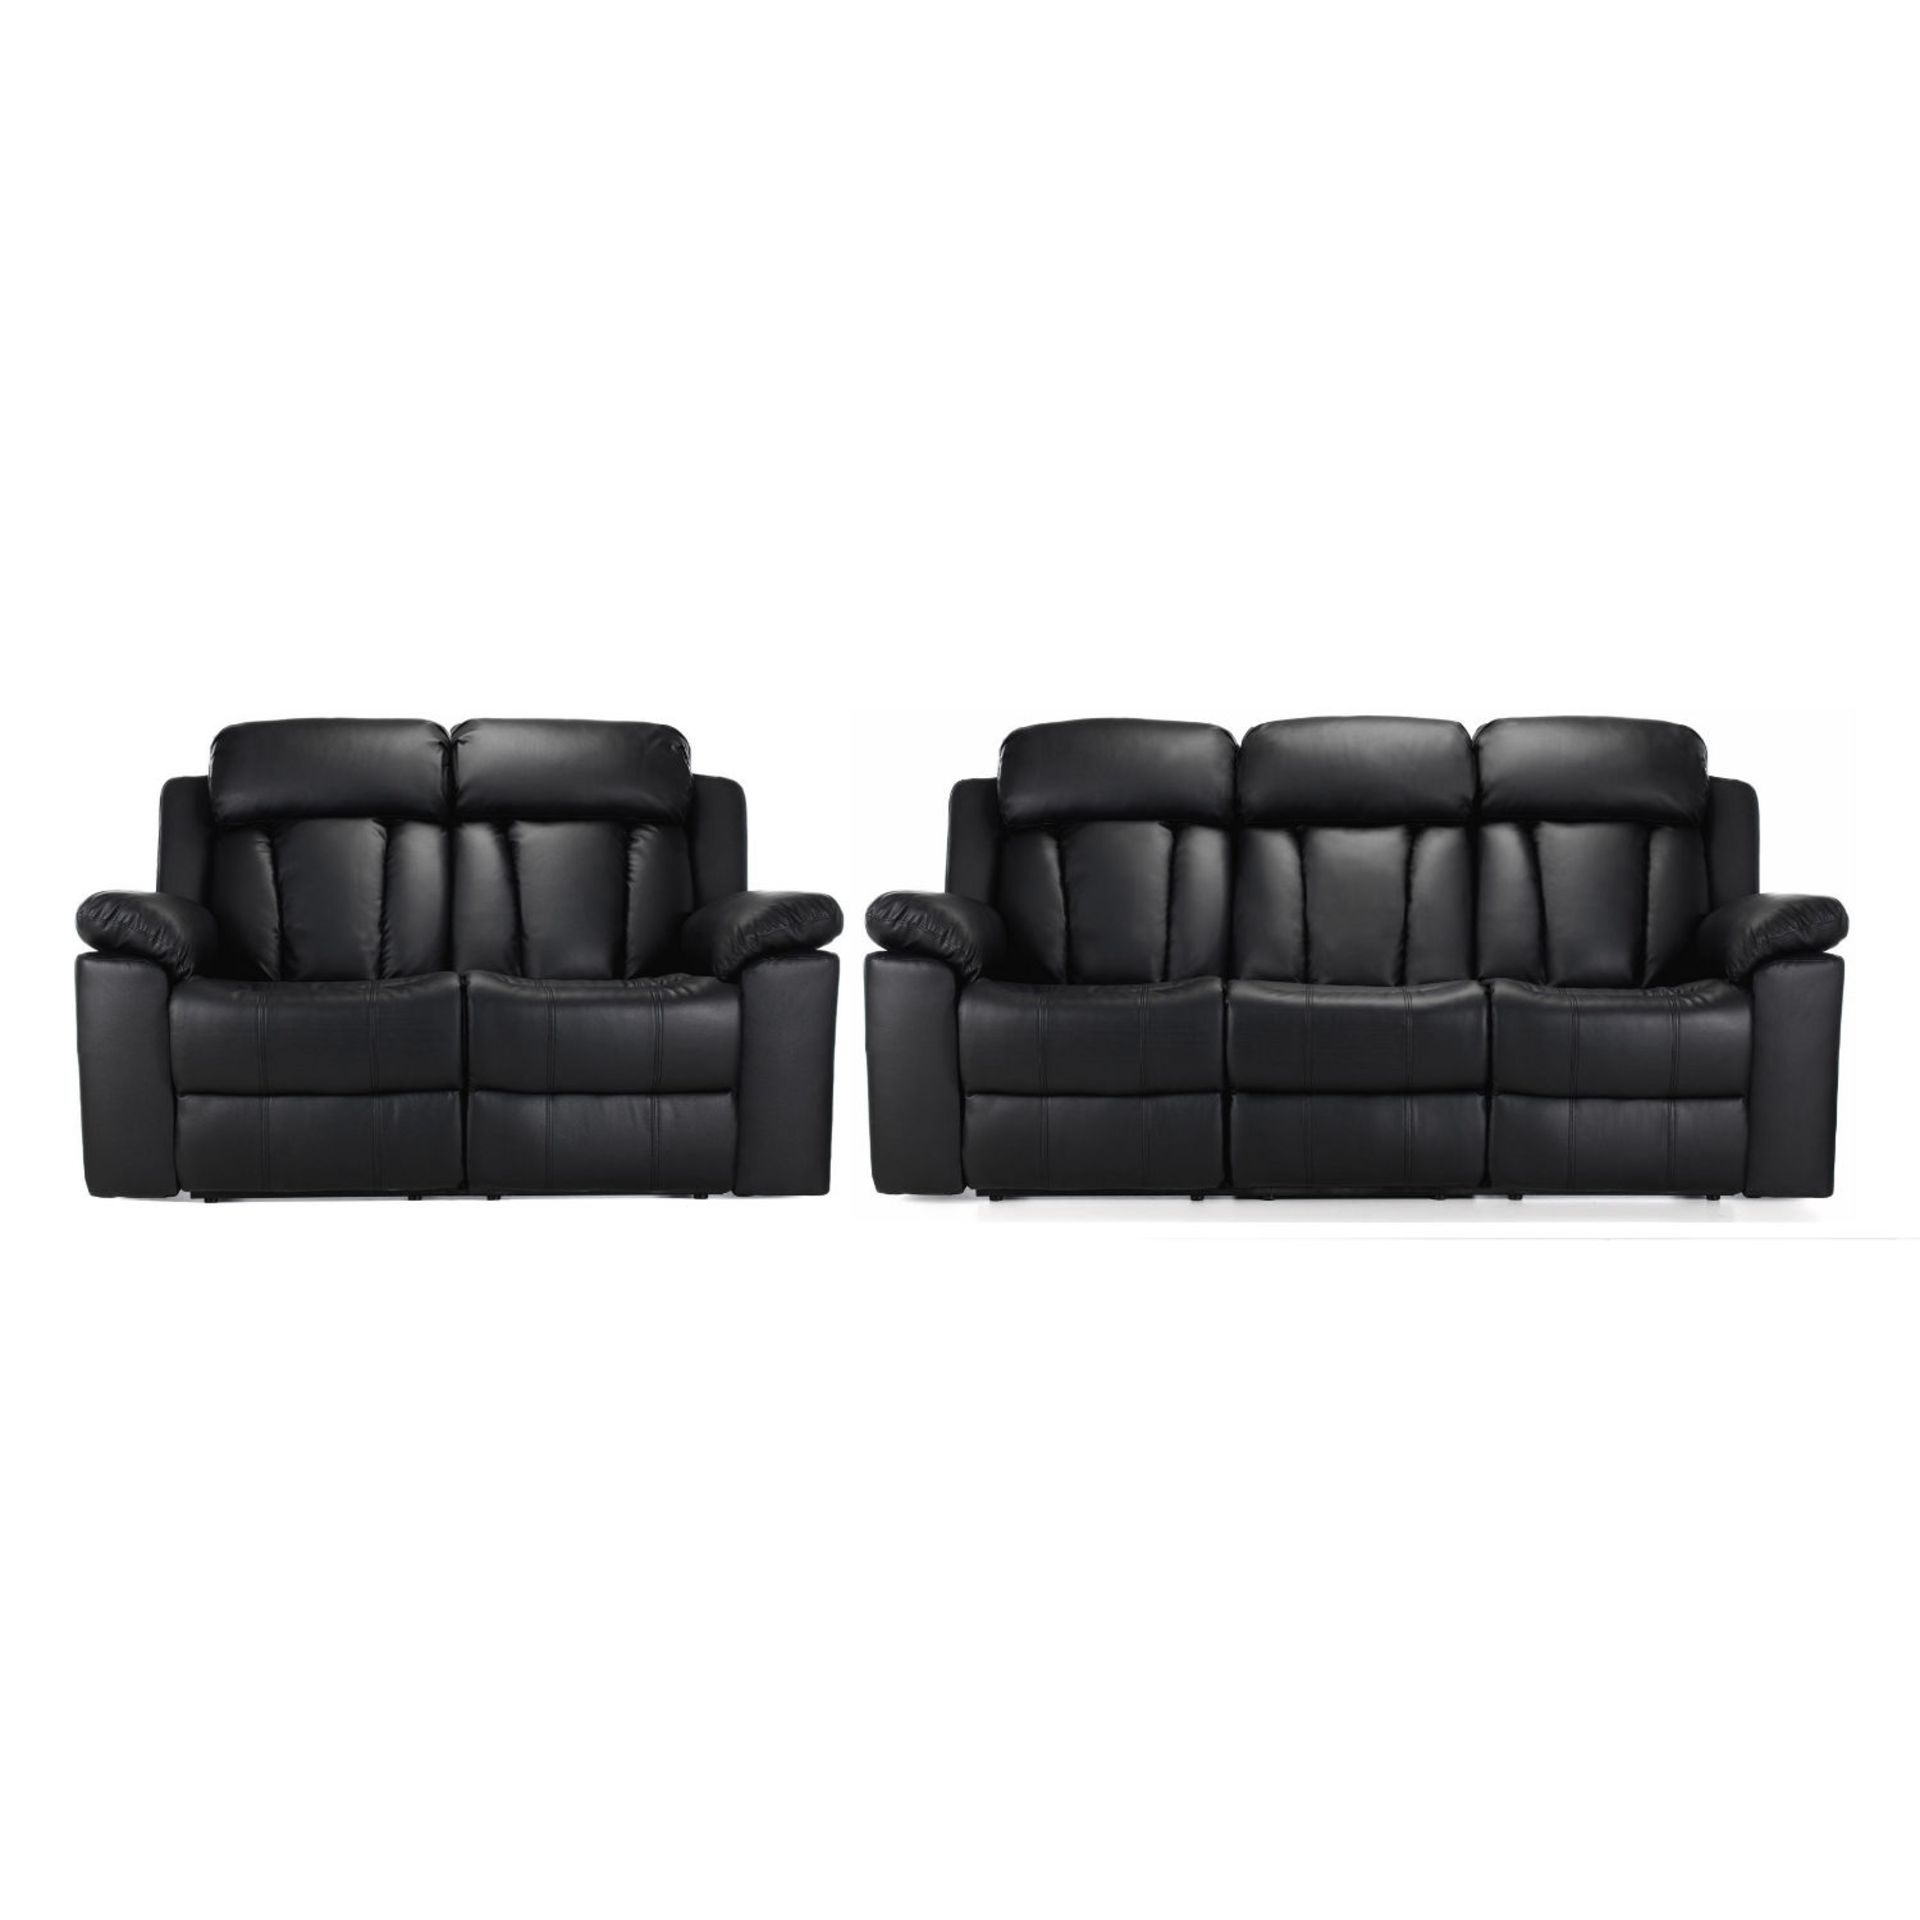 Brand new direct from the manufacturers Bermuda 3 seater plus 2 seater laredo fabric reclining